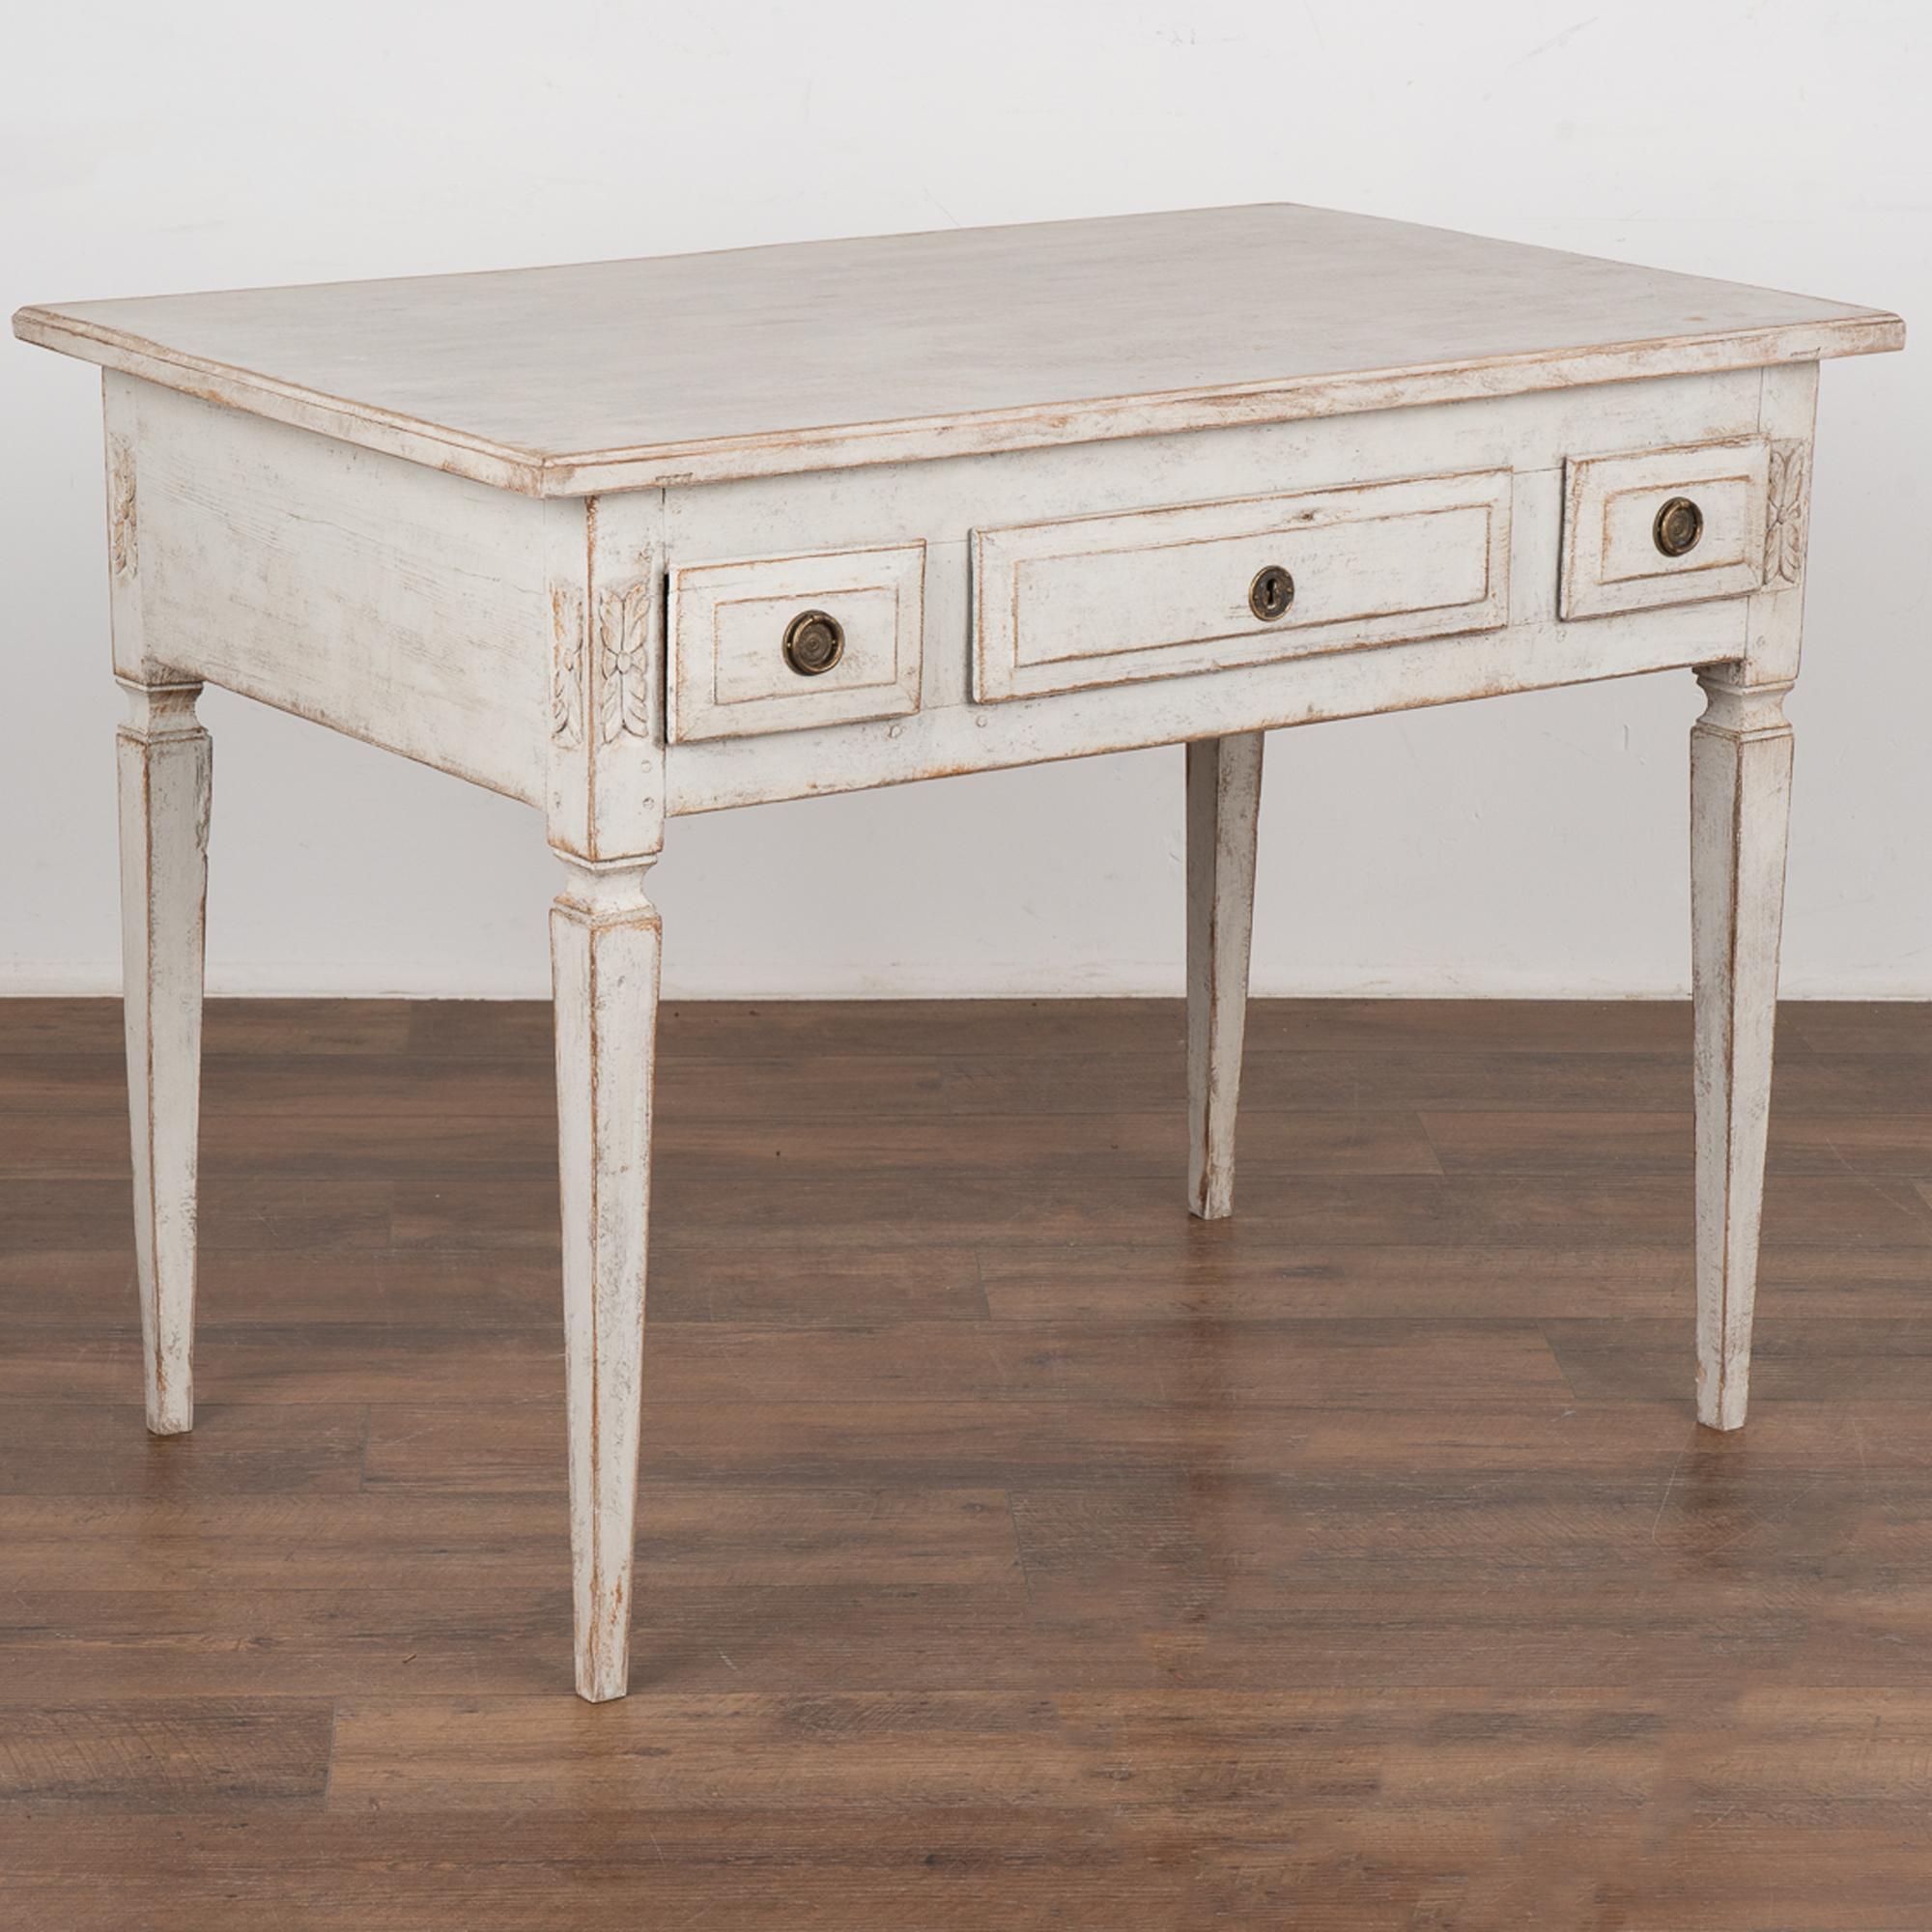 Swedish Gustavian pine side table with three drawers and lovely tapered legs.
Restored, later professionally painted in layered shades of white. 
Drawers function, outer two have brass pulls, skeleton key will be included as a 